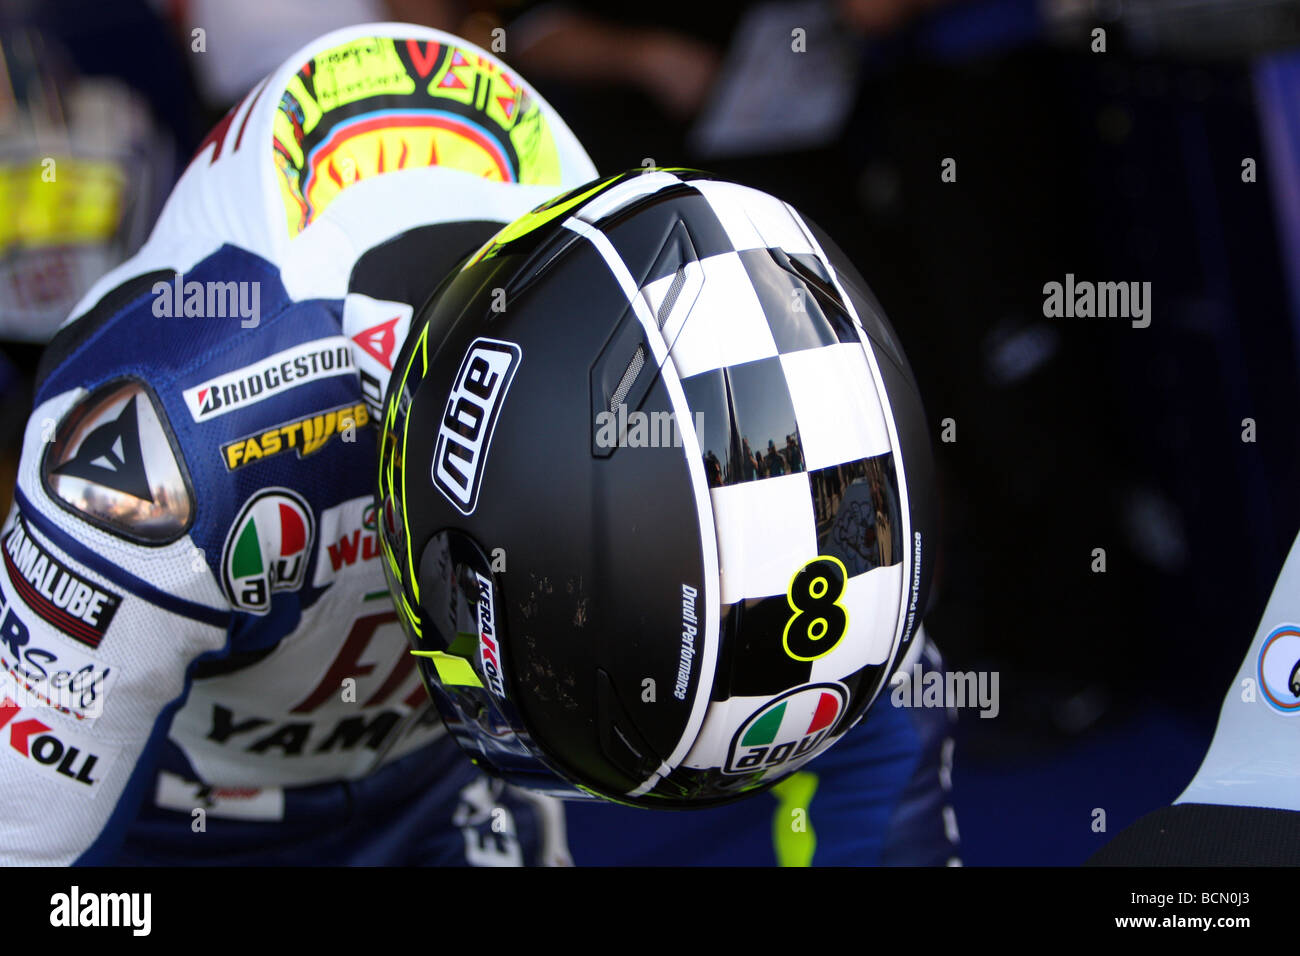 valentino rossi 46 the doctor wearing his 8 times world champion crash helmet designed by drudi Stock Photo